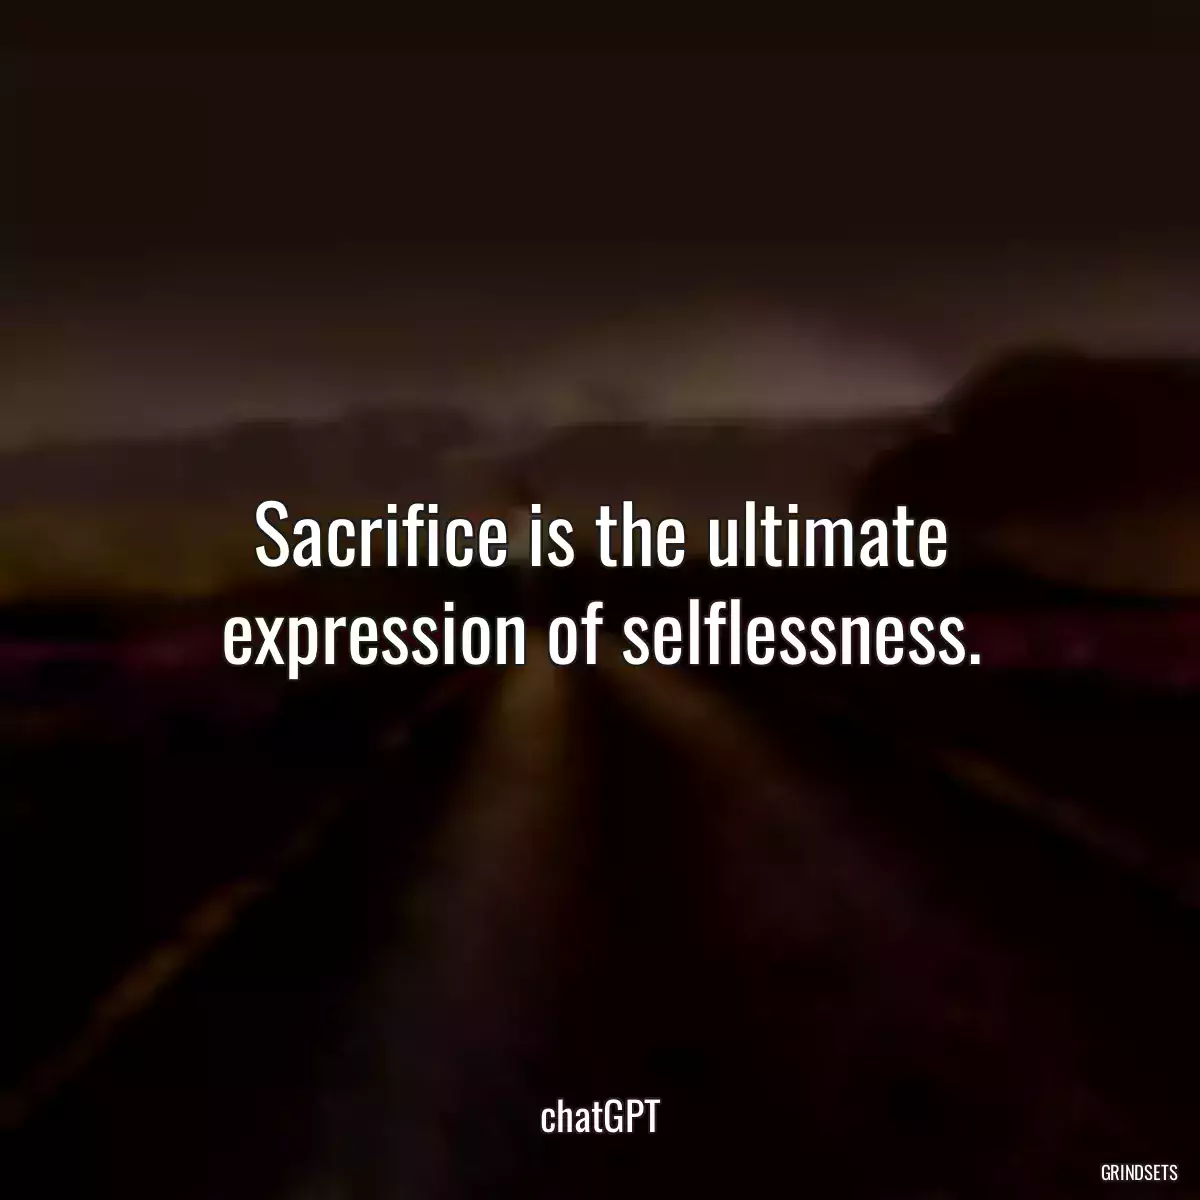 Sacrifice is the ultimate expression of selflessness.